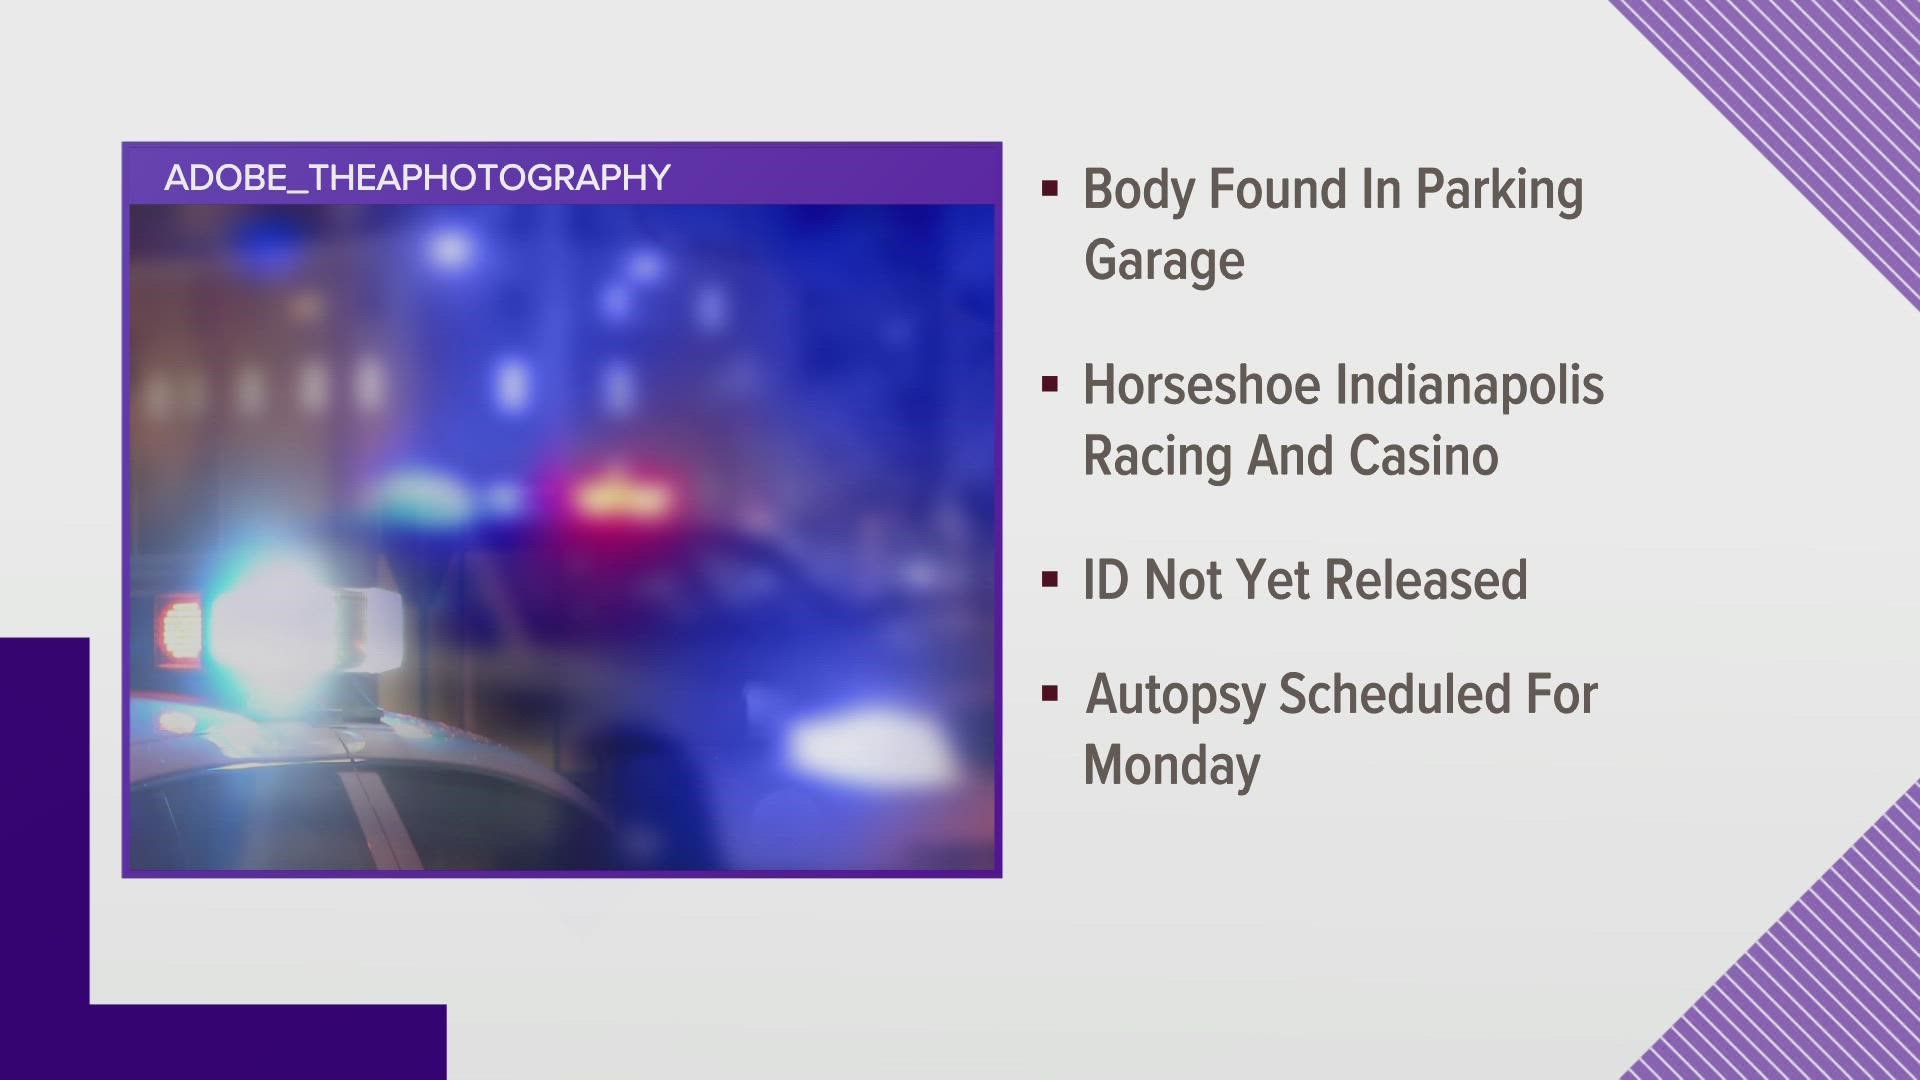 The coroner's office was called to Horseshoe Indianapolis Racing and Casino on a report of a person found dead in the casino's parking garage.